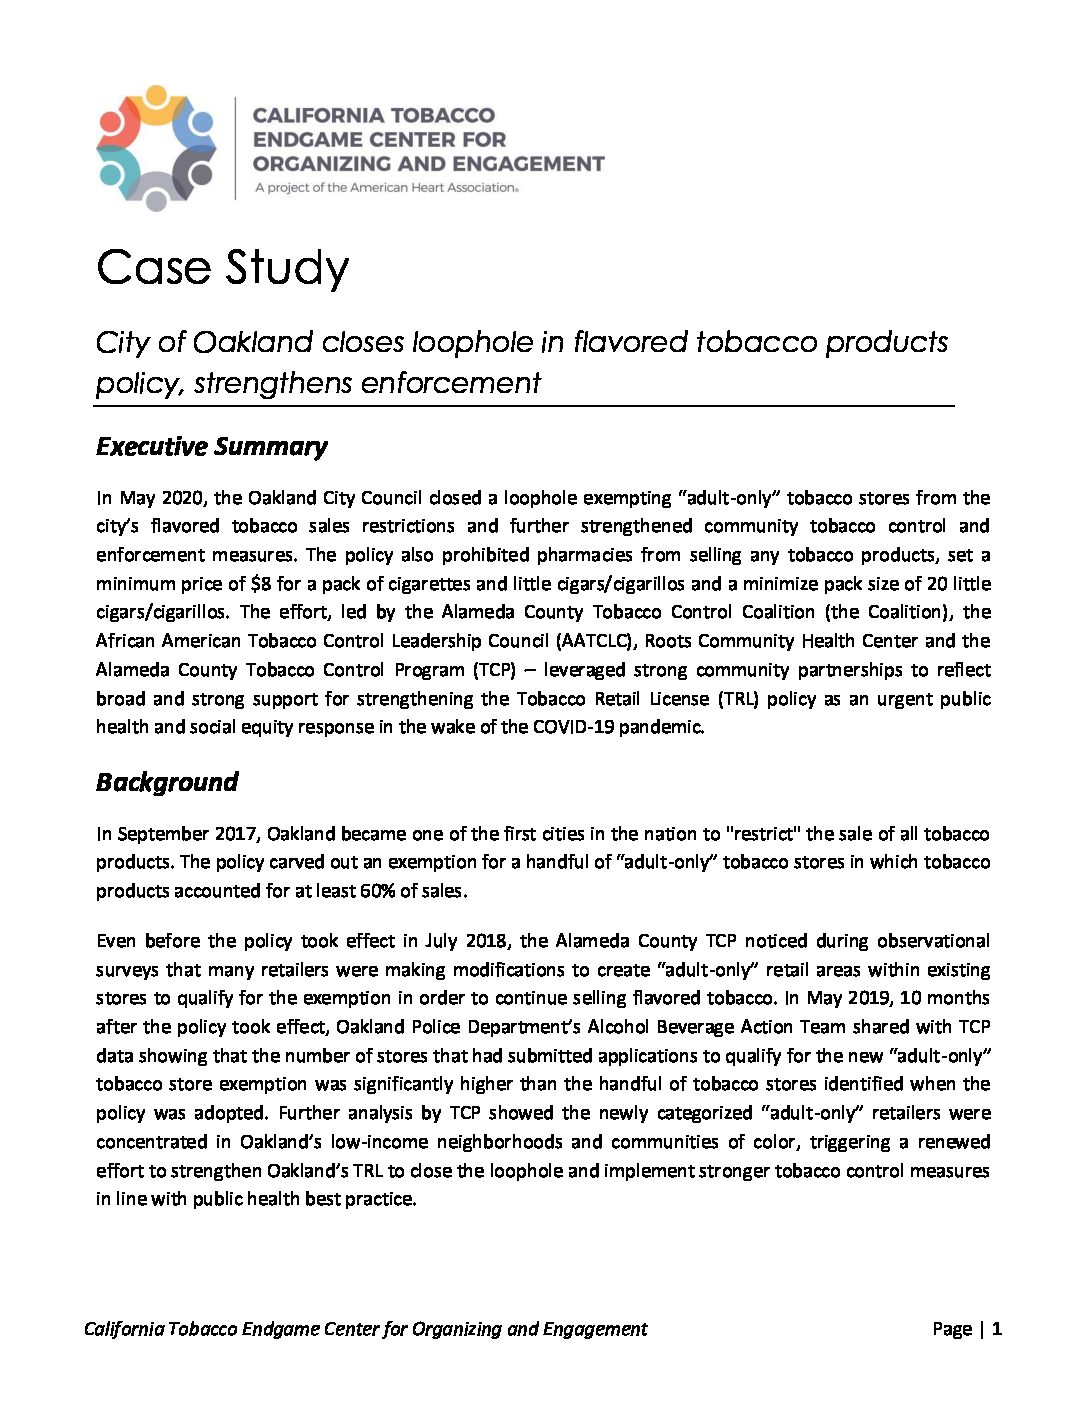 In May 2020, the Oakland City Council closed a loophole exempting “adult-only” tobacco stores from the city’s flavored tobacco sales restrictions and further strengthened community tobacco control and enforcement measures. The policy also prohibited pharmacies from selling any tobacco products, set a minimum price of $8 for a pack of cigarettes and little cigars/cigarillos and a minimize pack size of 20 little cigars/cigarillos. The effort, led by the Alameda County Tobacco Control Coalition (the Coalition), the African American Tobacco Control Leadership Council (AATCLC), Roots Community Health Center and the Alameda County Tobacco Control Program (TCP) – leveraged strong community partnerships to reflect broad and strong support for strengthening the Tobacco Retail License (TRL) policy as an urgent public health and social equity response in the wake of the COVID-19 pandemic.